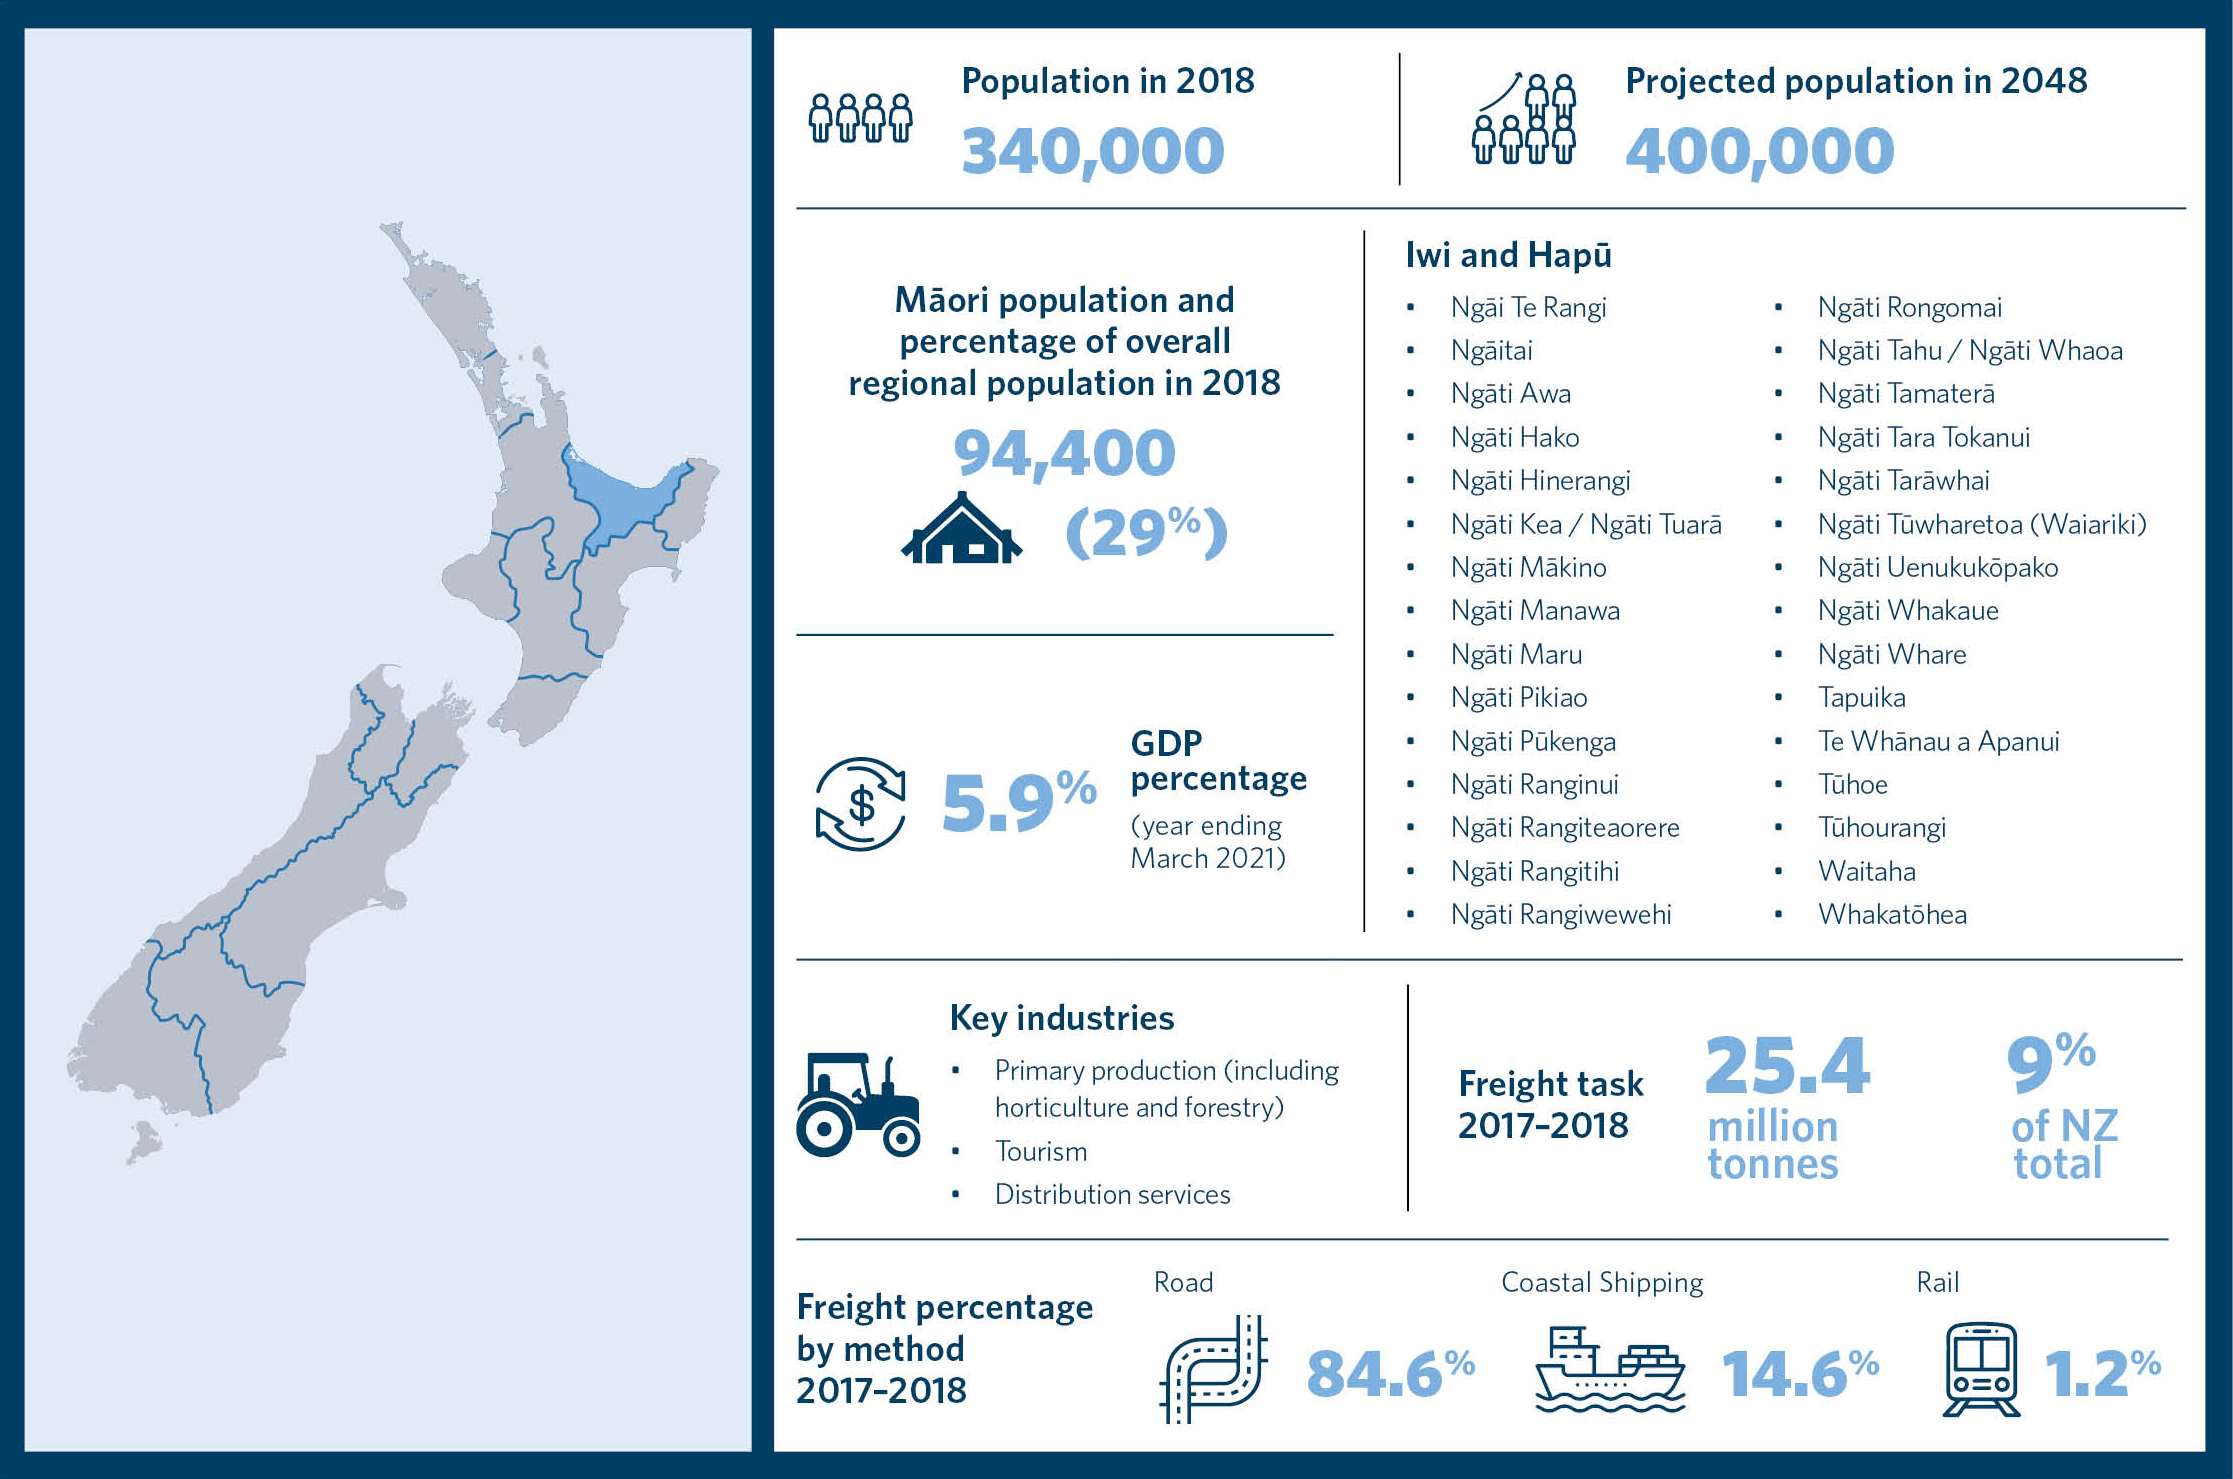 o	This is an infographic showing statistics for the region of Te Moana a Toi-te-Huatahi Bay of Plenty. It includes information about the population in 2018, projected population in 2048, Māori population and percentage of overall regional population in 20